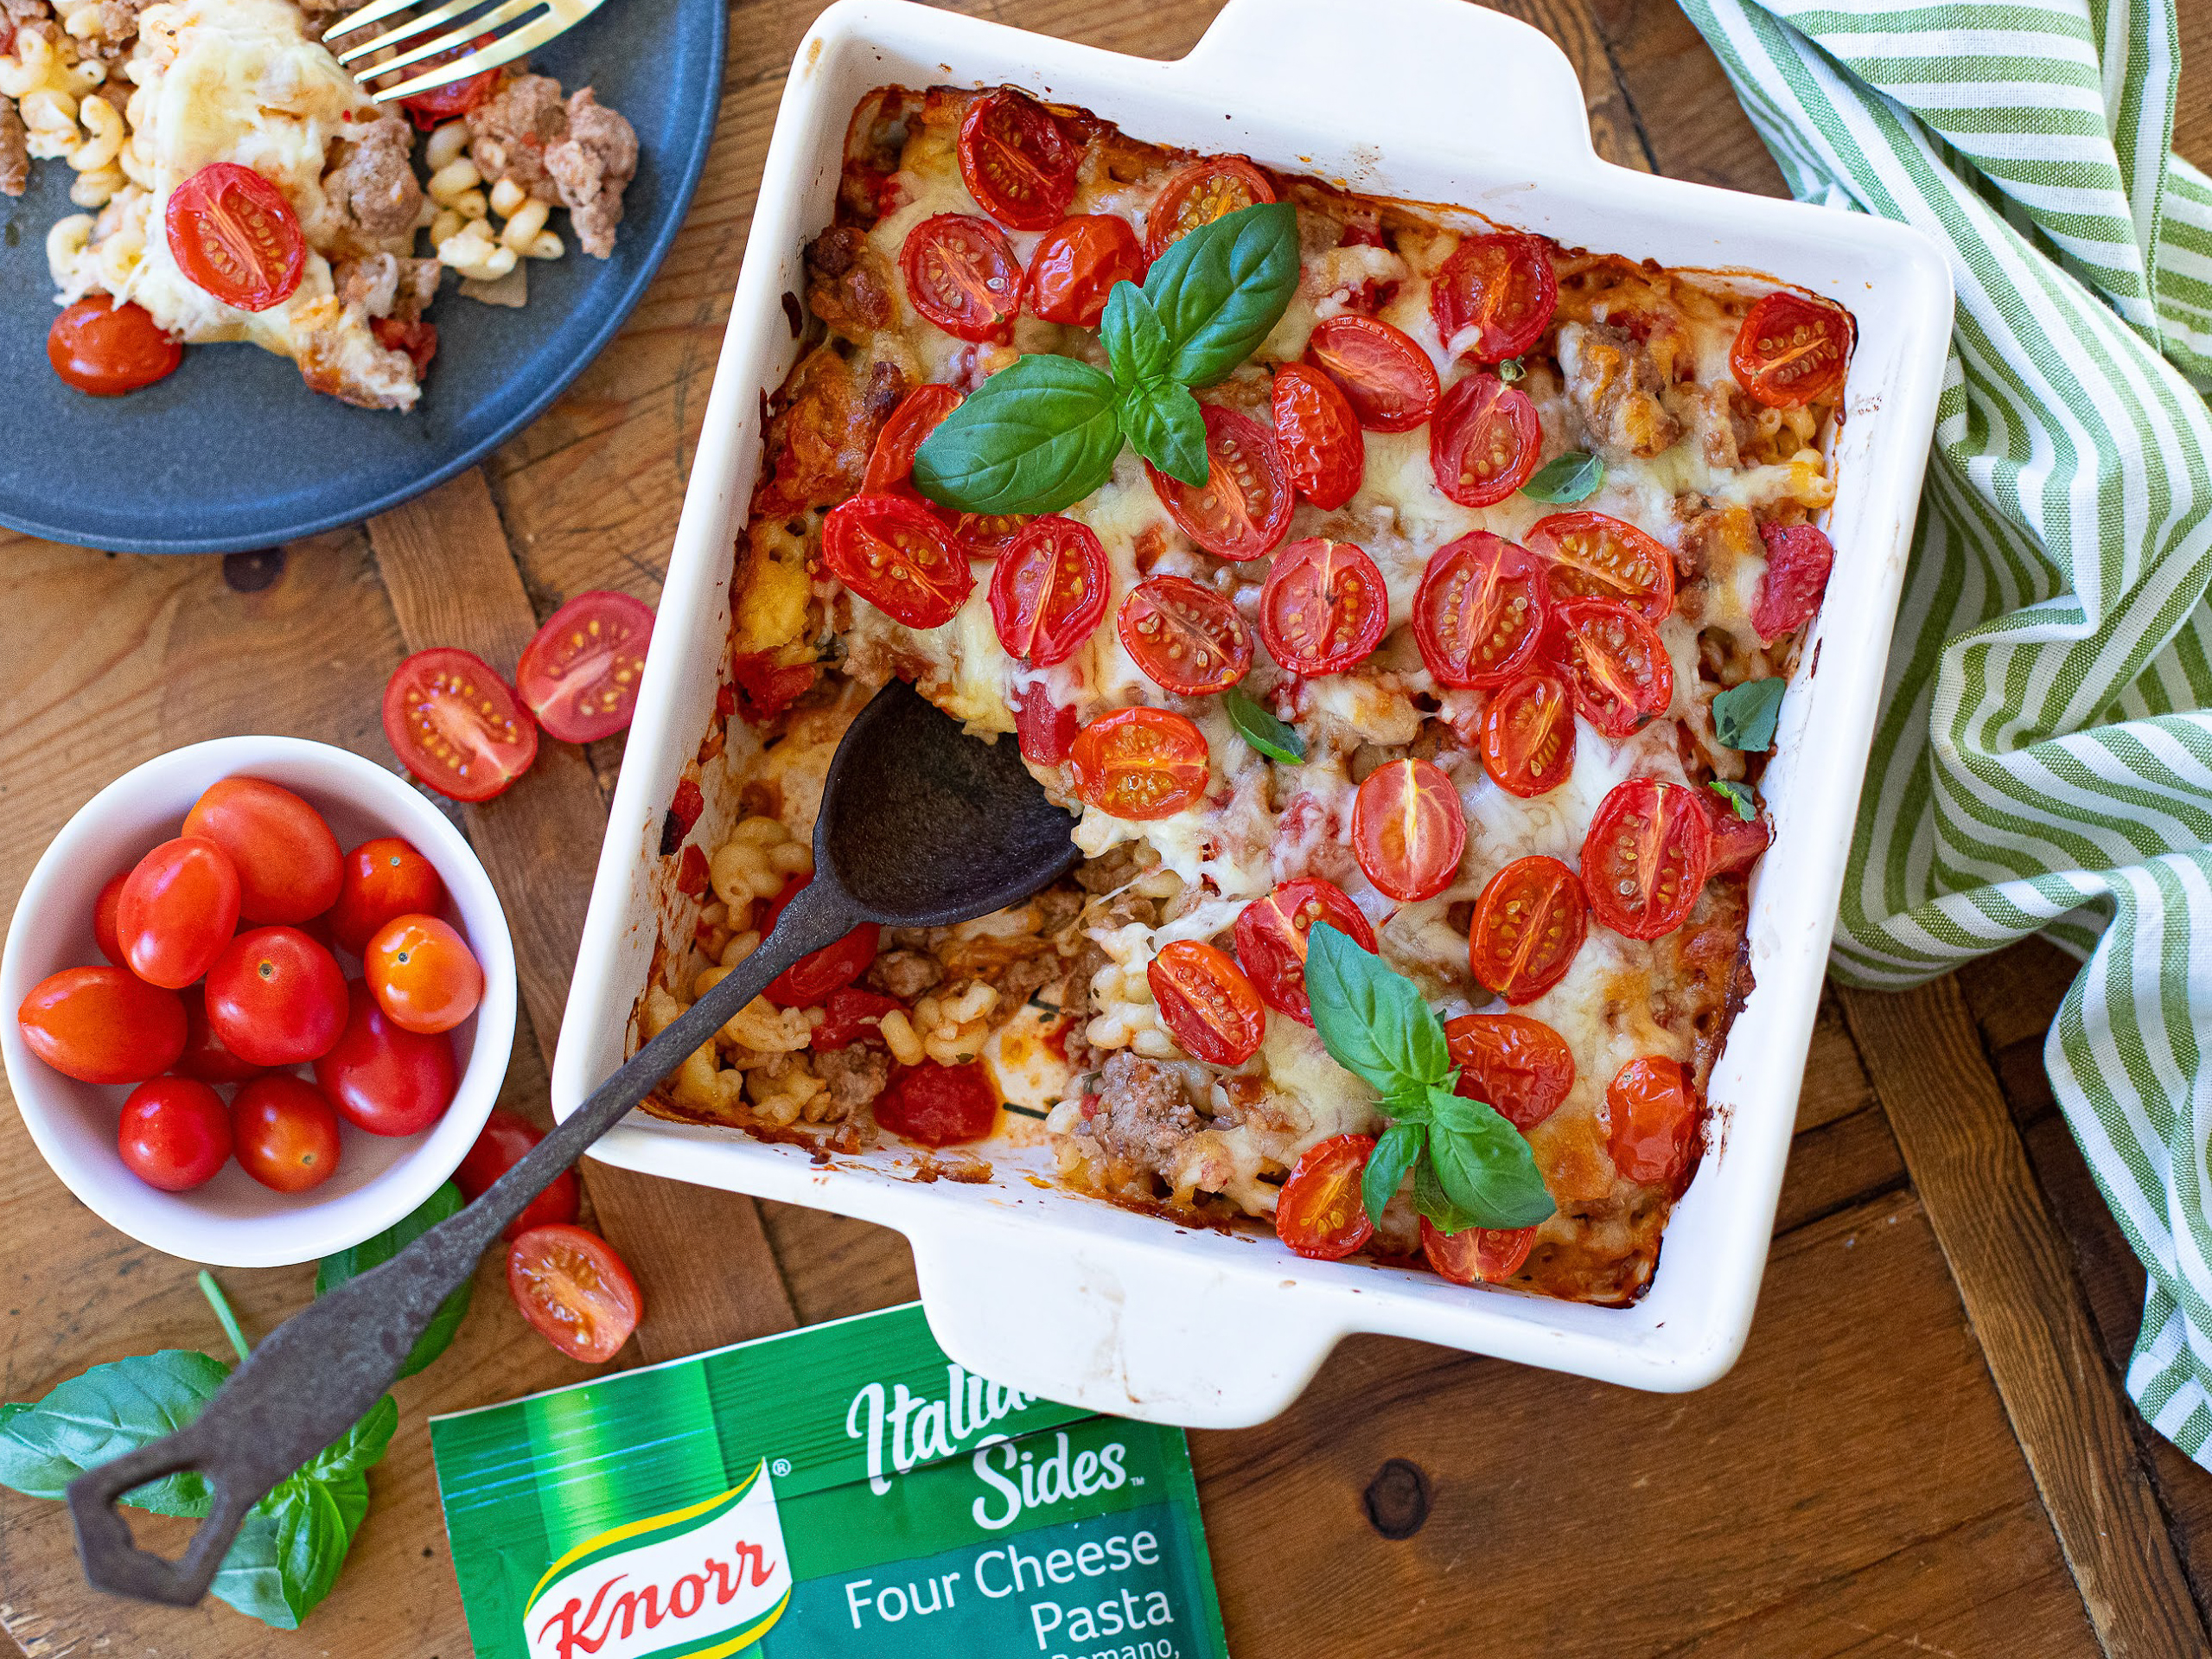 Get Everything You Need For Delicious Meals Like My Easy Italian Casserole At Publix - Save BIG & Earn A Gift Card! on I Heart Publix 5